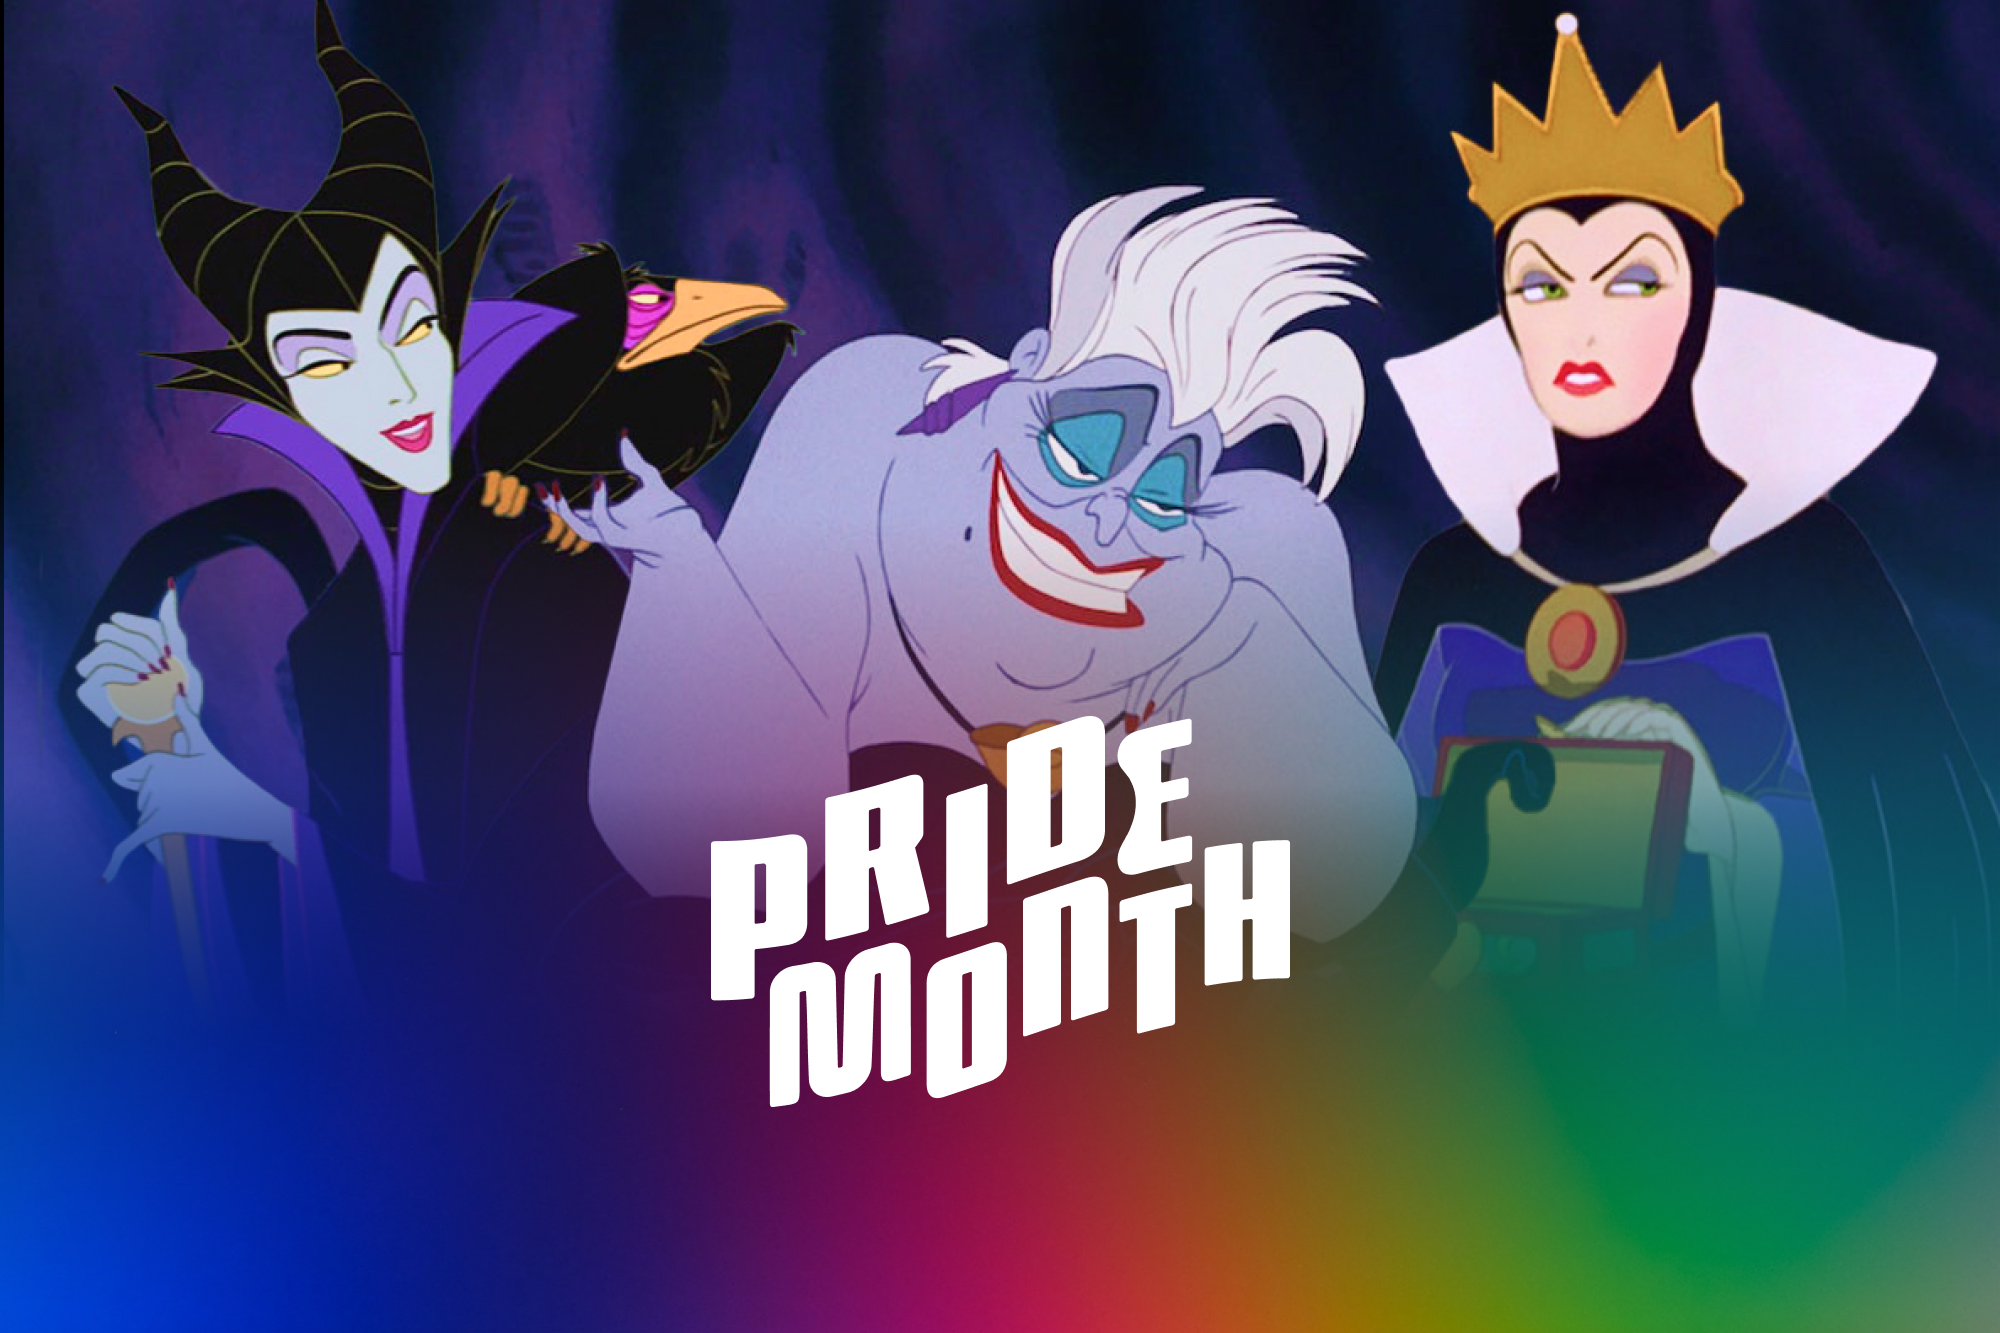 The problem with Disney and its queer-coded villains | Digital Trends